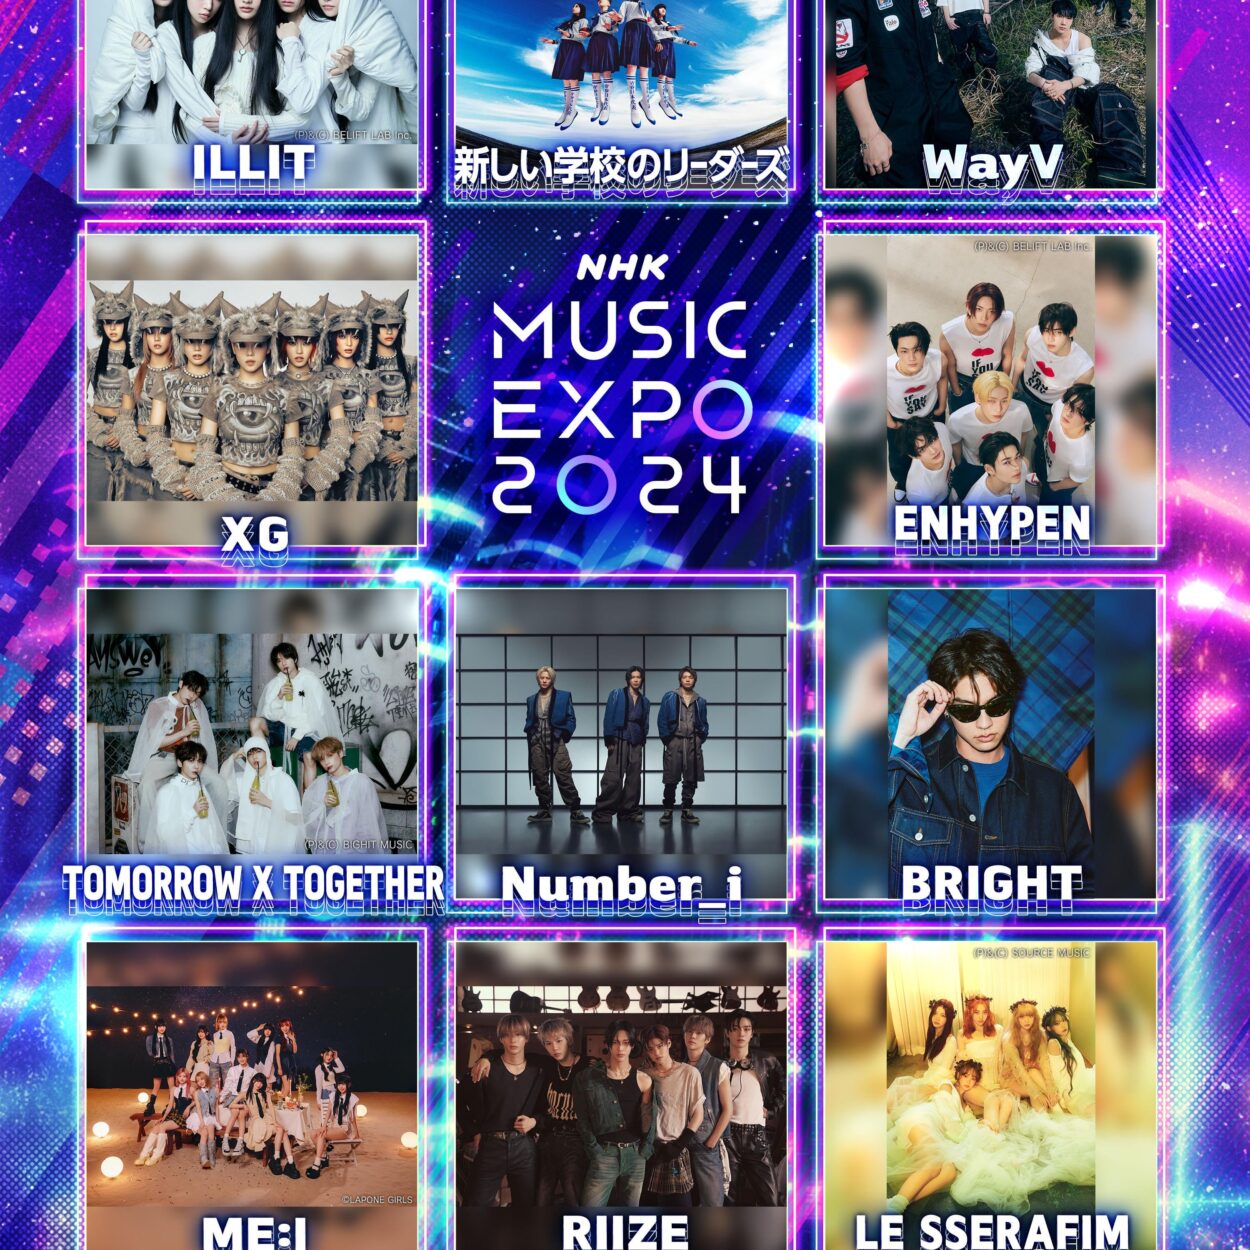 240711 ENHYPEN is part of the lineup for NHK’s “Music Expo 2024” airing on August 22